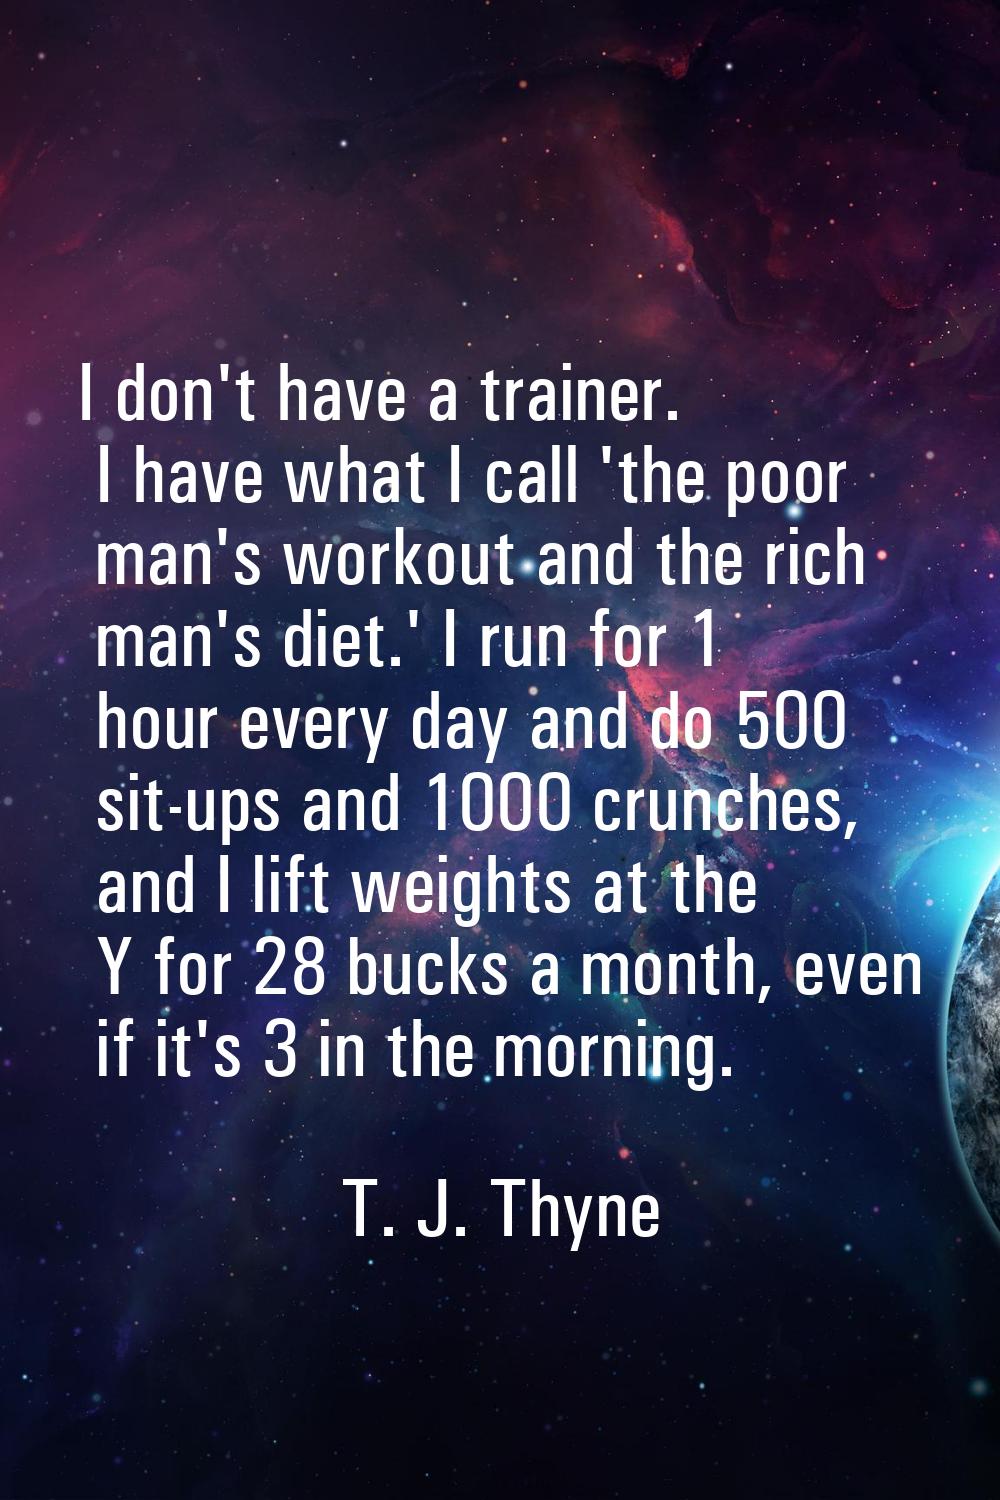 I don't have a trainer. I have what I call 'the poor man's workout and the rich man's diet.' I run 